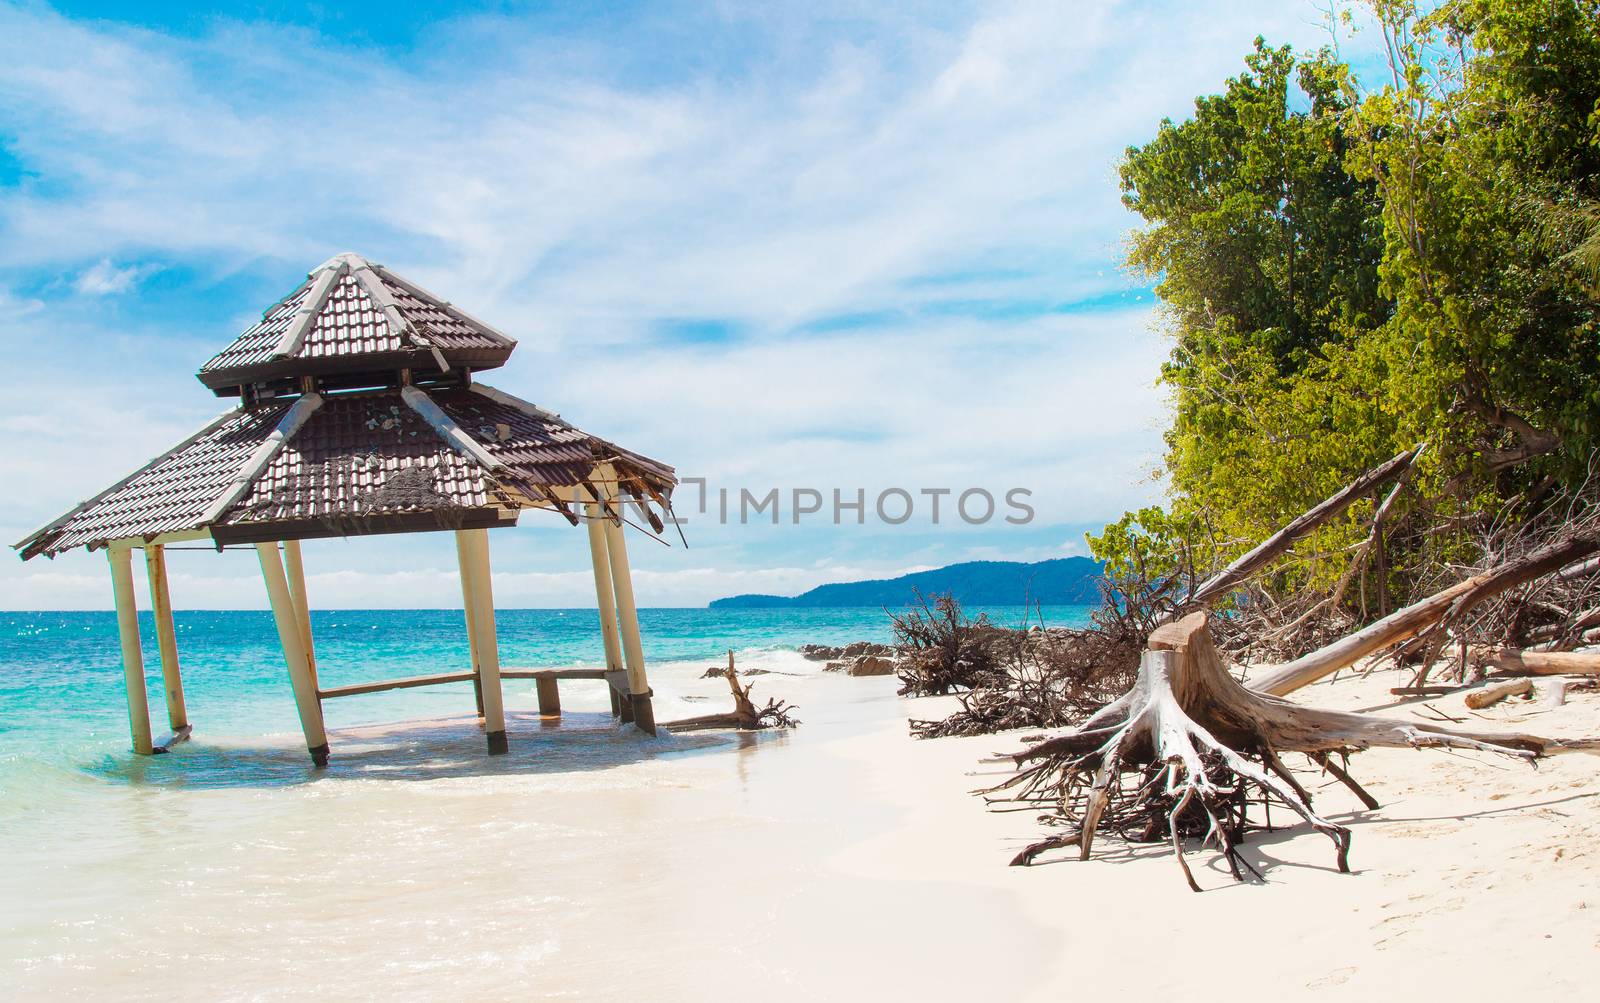 Thailand Phi-Phi island view with broken trees and old viewpoint pergola